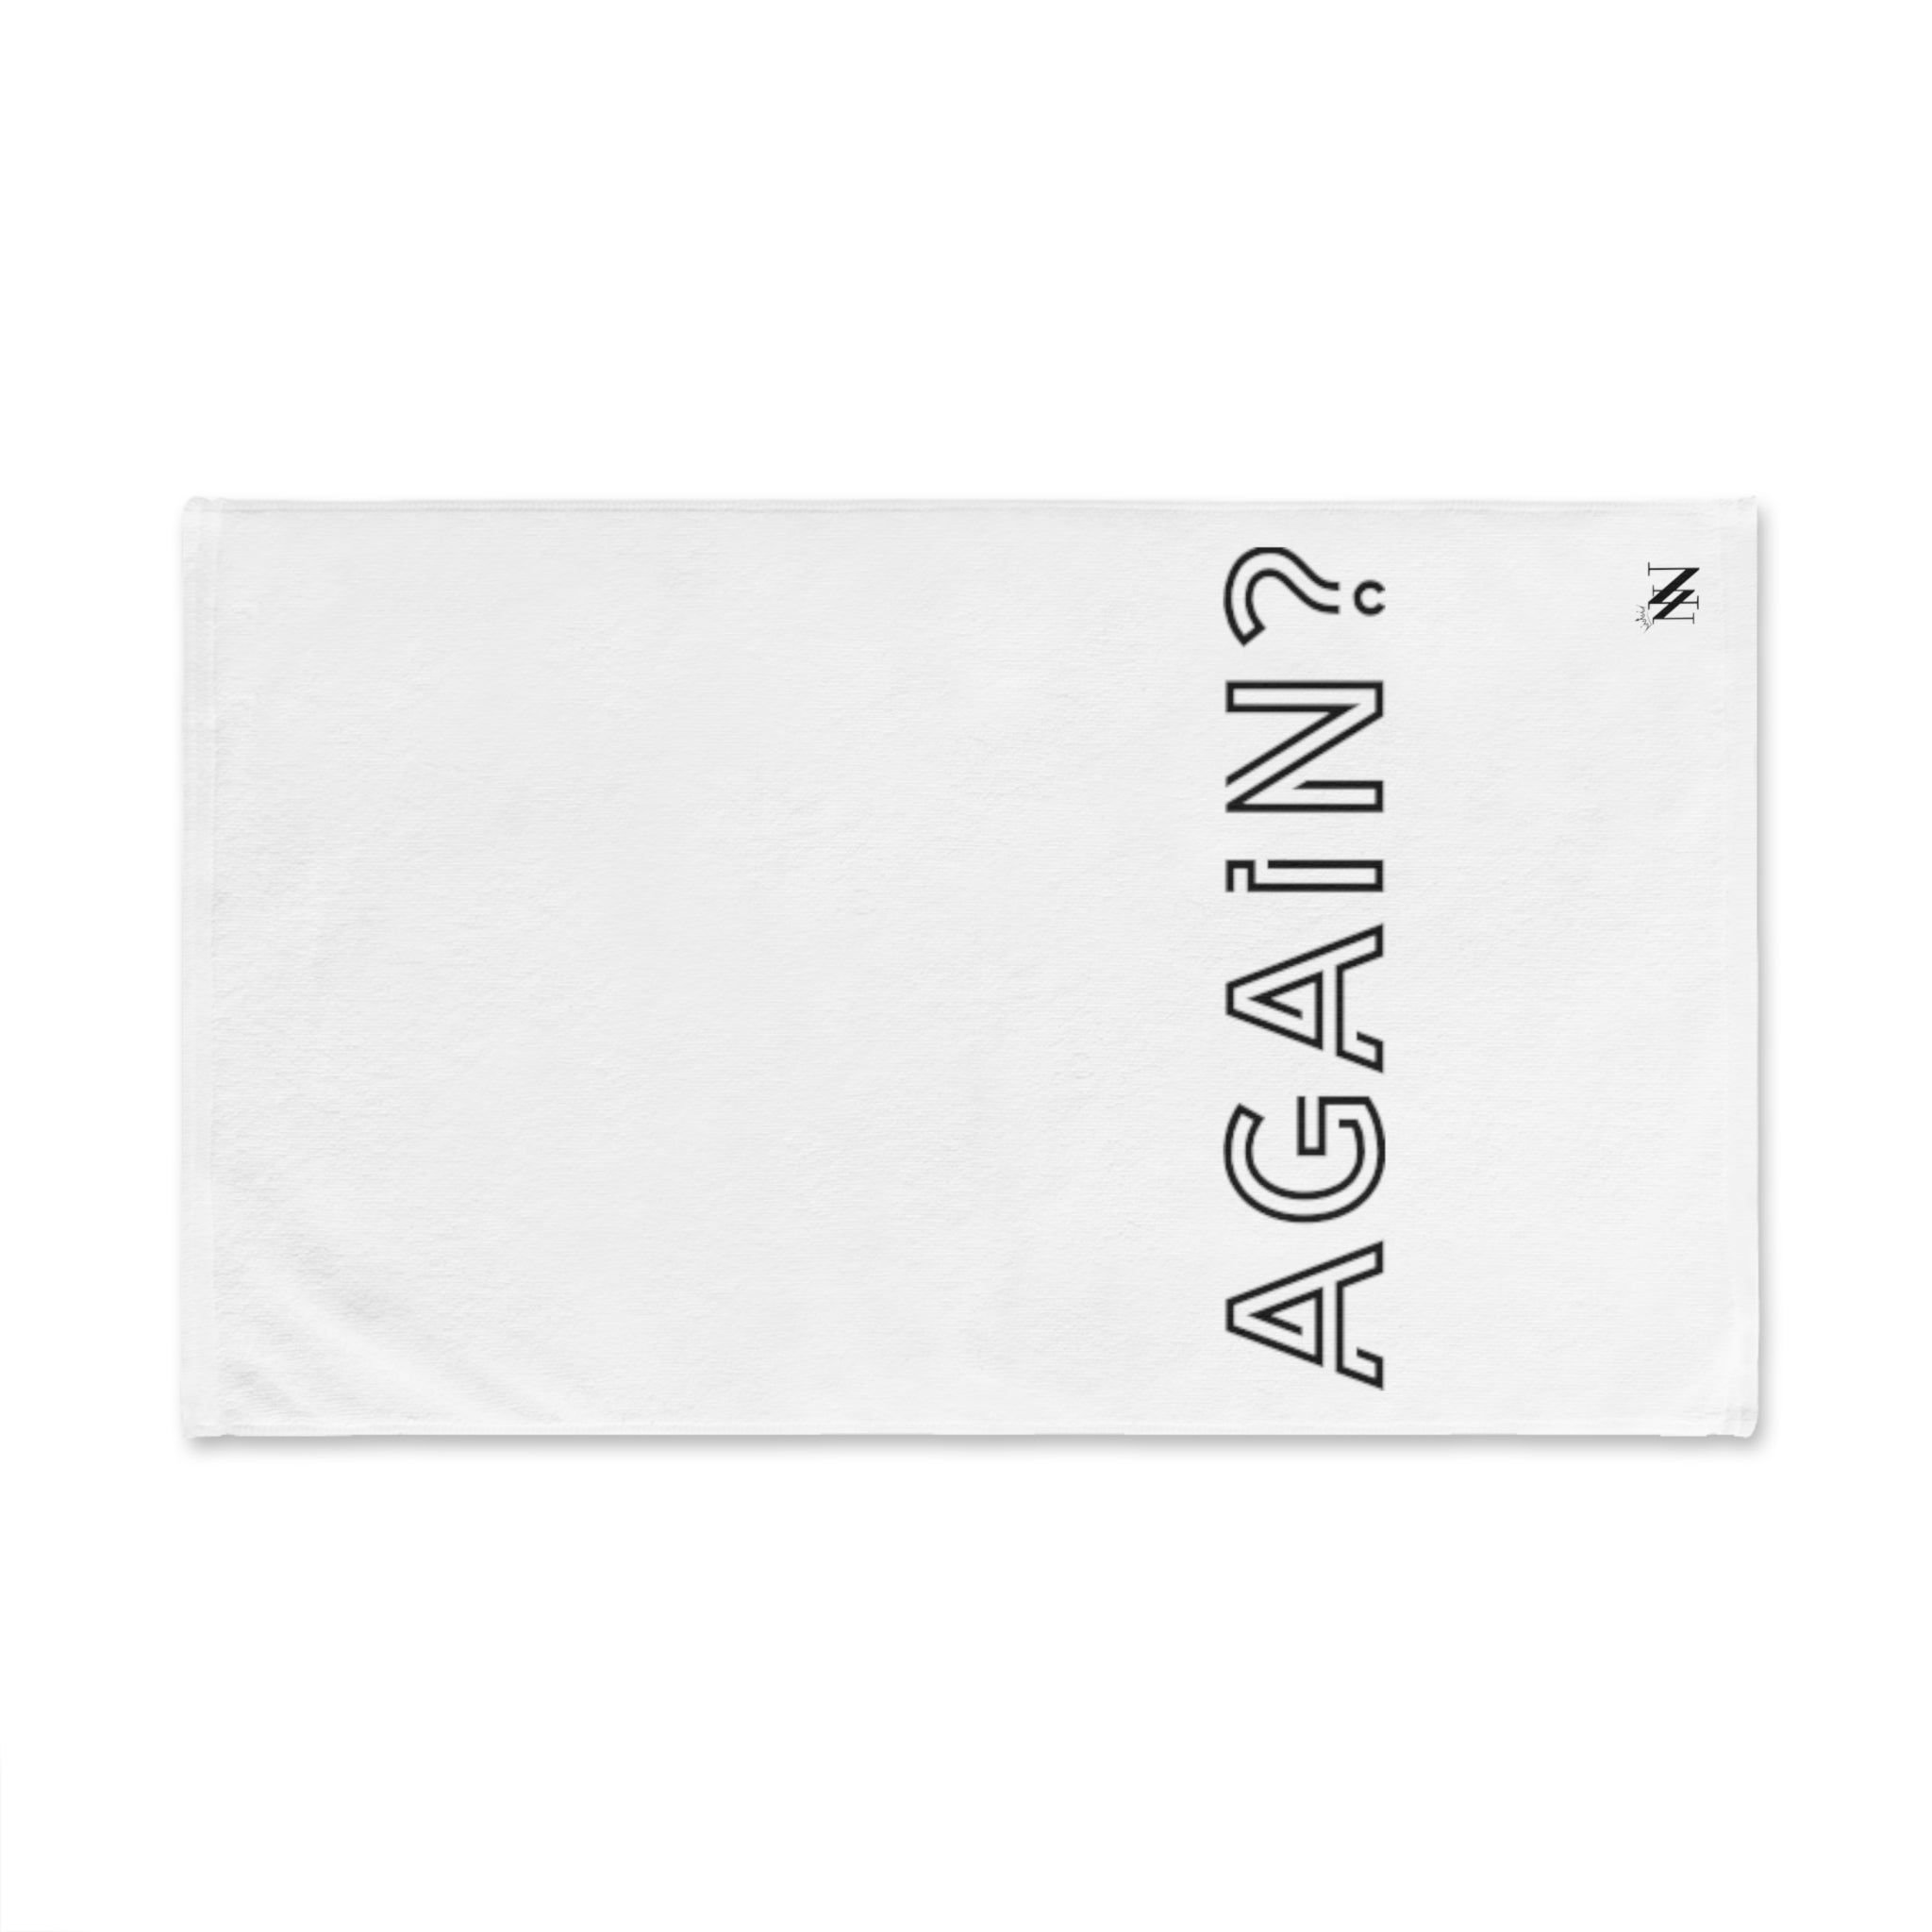 Again? | Nectar Napkins Fun-Flirty Lovers' After Sex Towels NECTAR NAPKINS